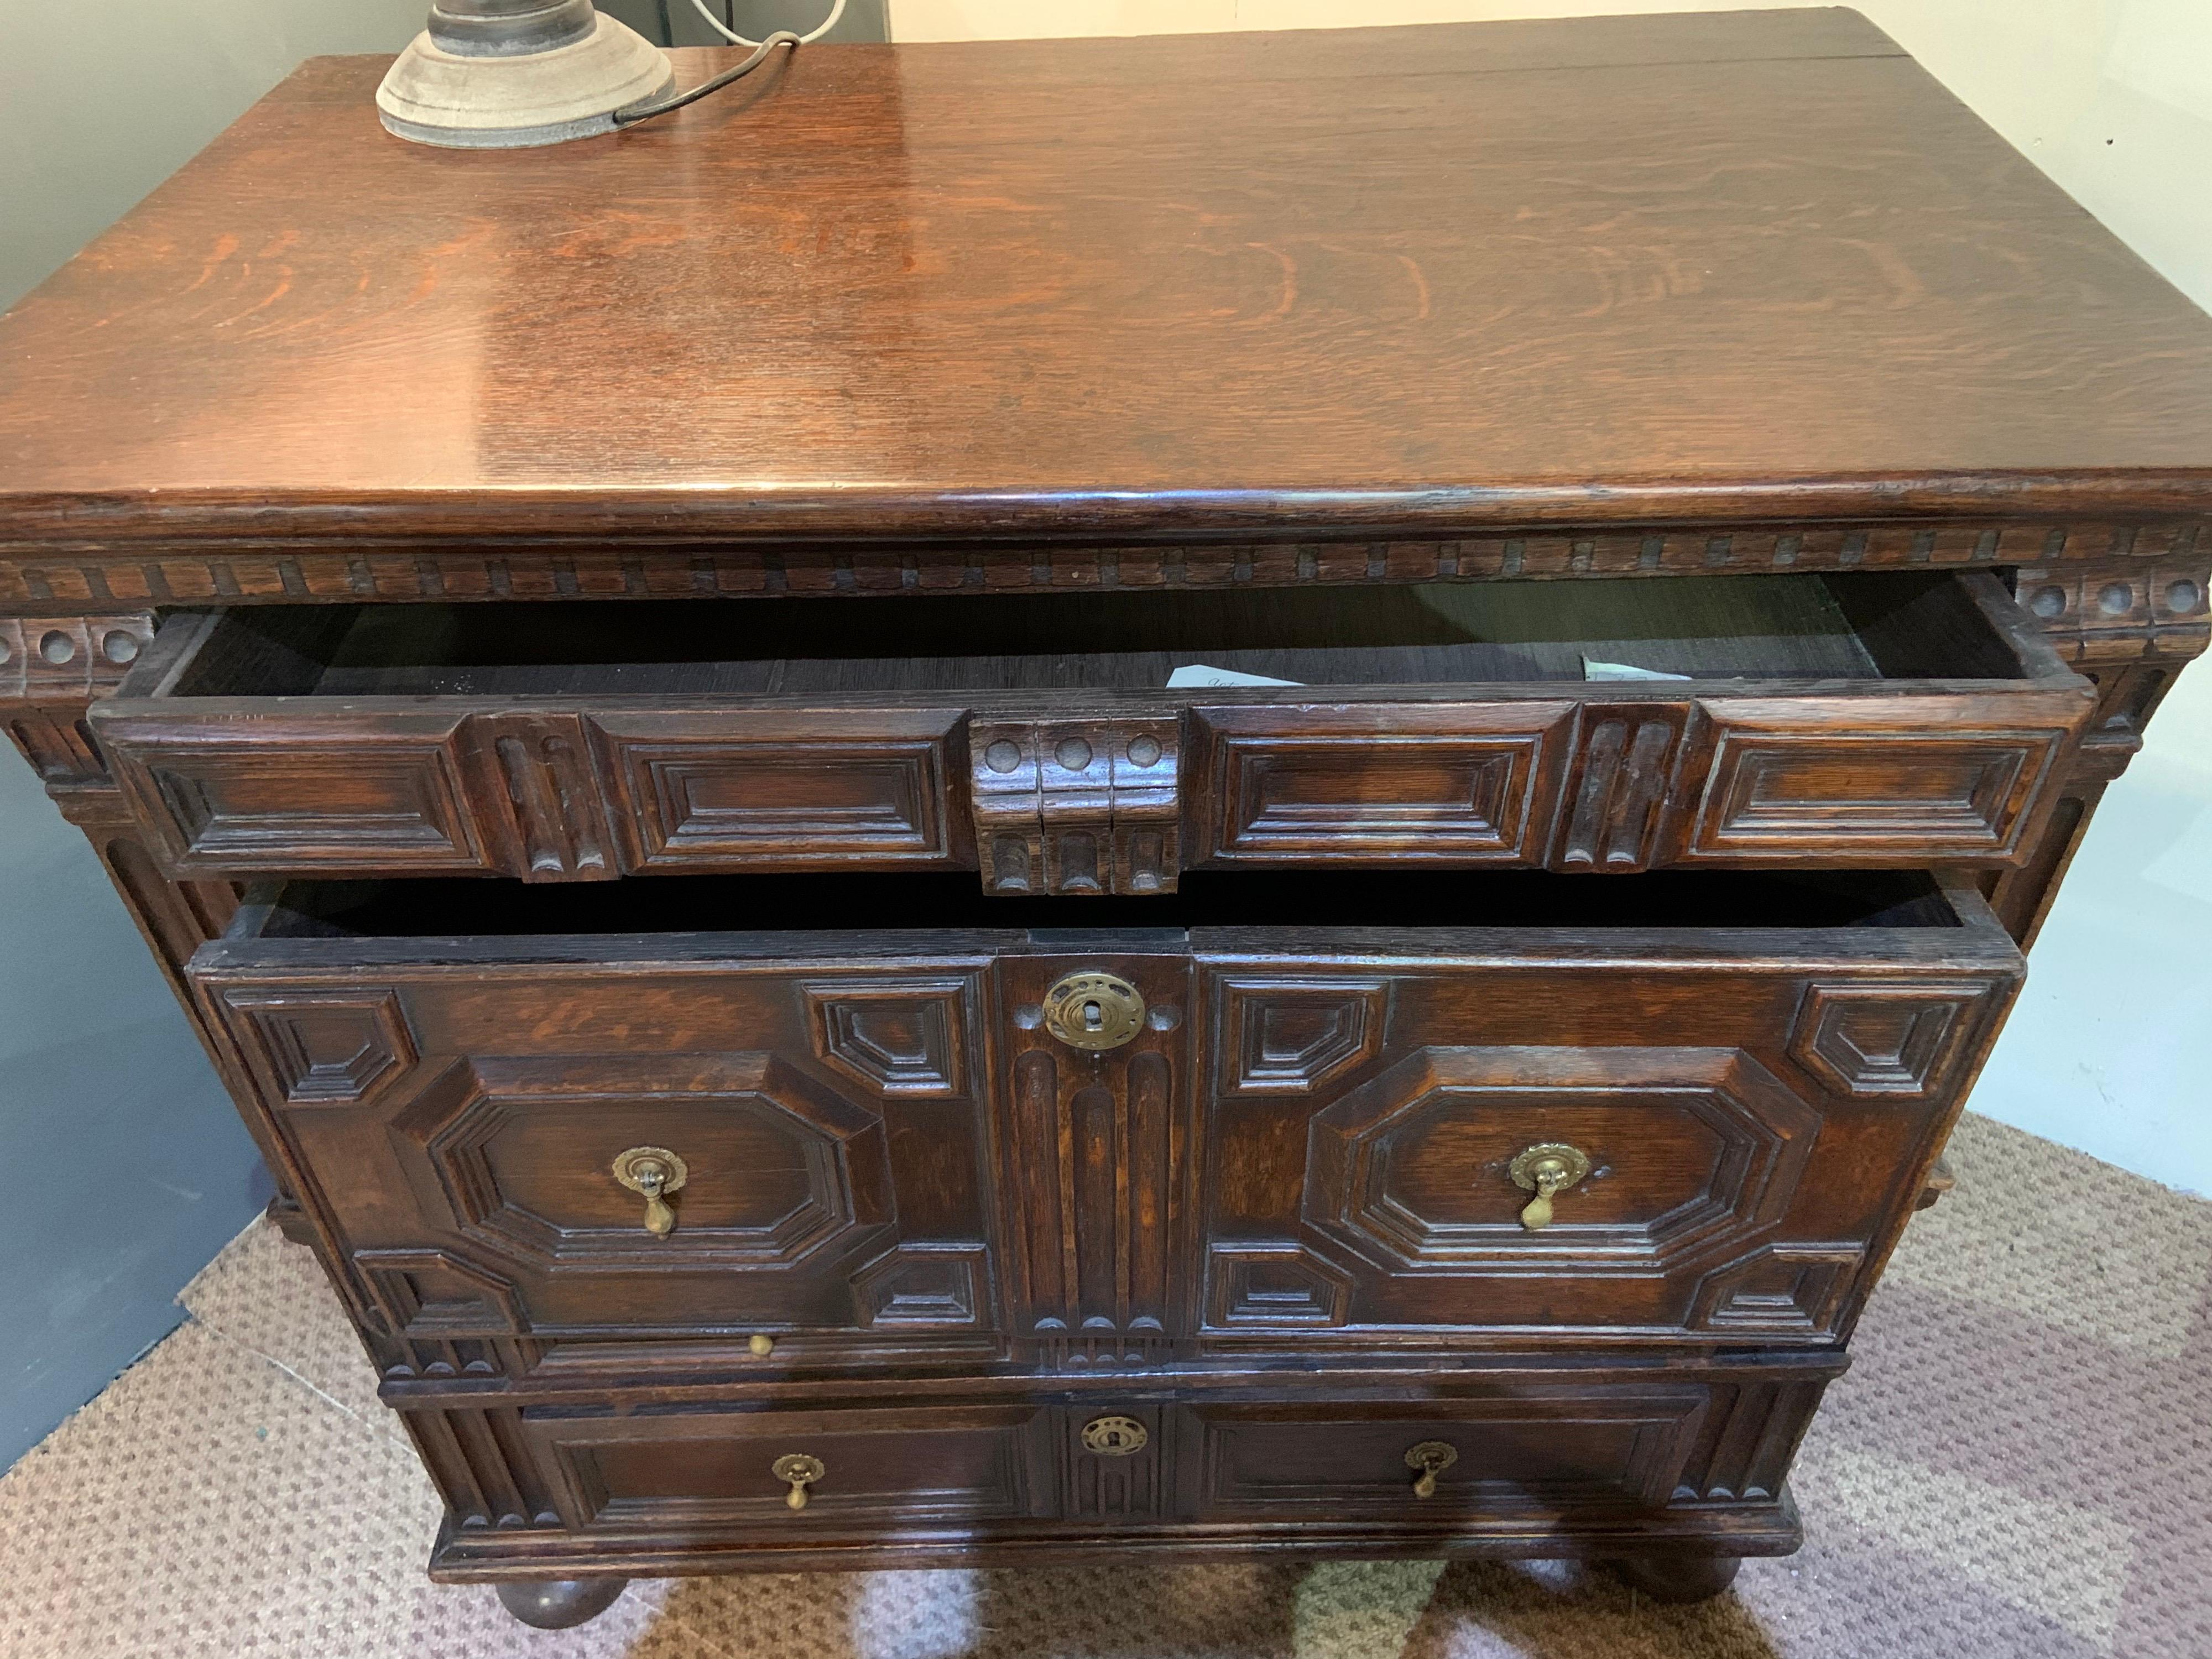 18th century oak architectural geometric chest of drawers. Top hangs over four drawers of varying sizes, having geometrically moulded fronts opening on side runners. Chest of drawers stand on bunn feet. Rich color and patination. Very solid, sturdy